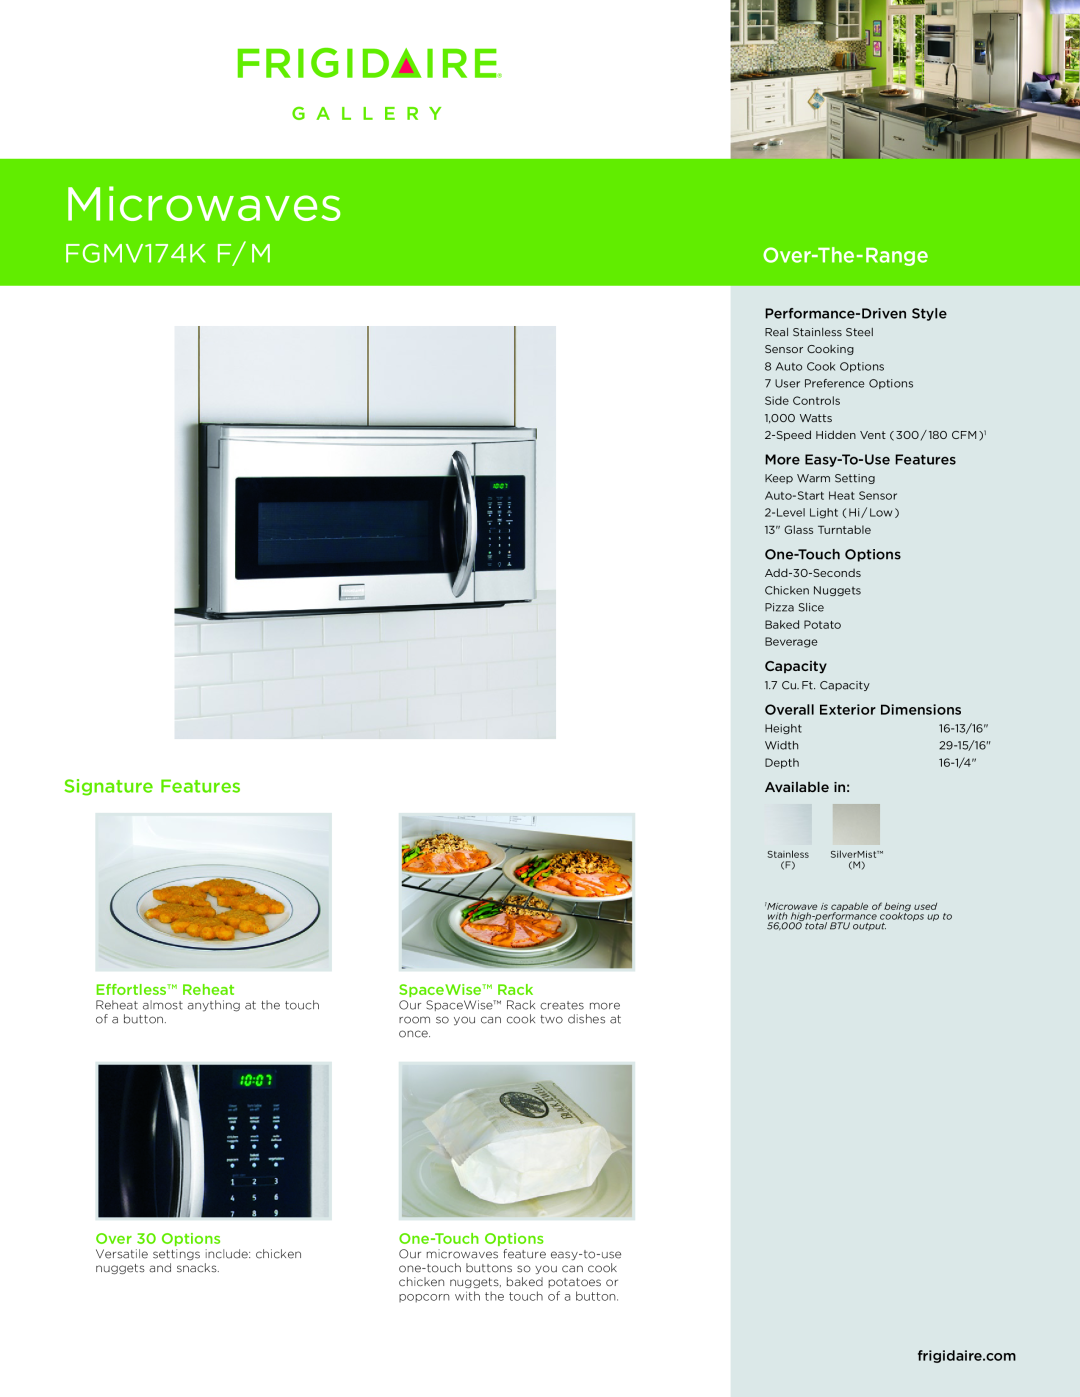 Frigidaire FGMV174K dimensions Effortless Reheat, SpaceWise Rack, Over 30 Options, One-TouchOptions, Capacity, Microwaves 